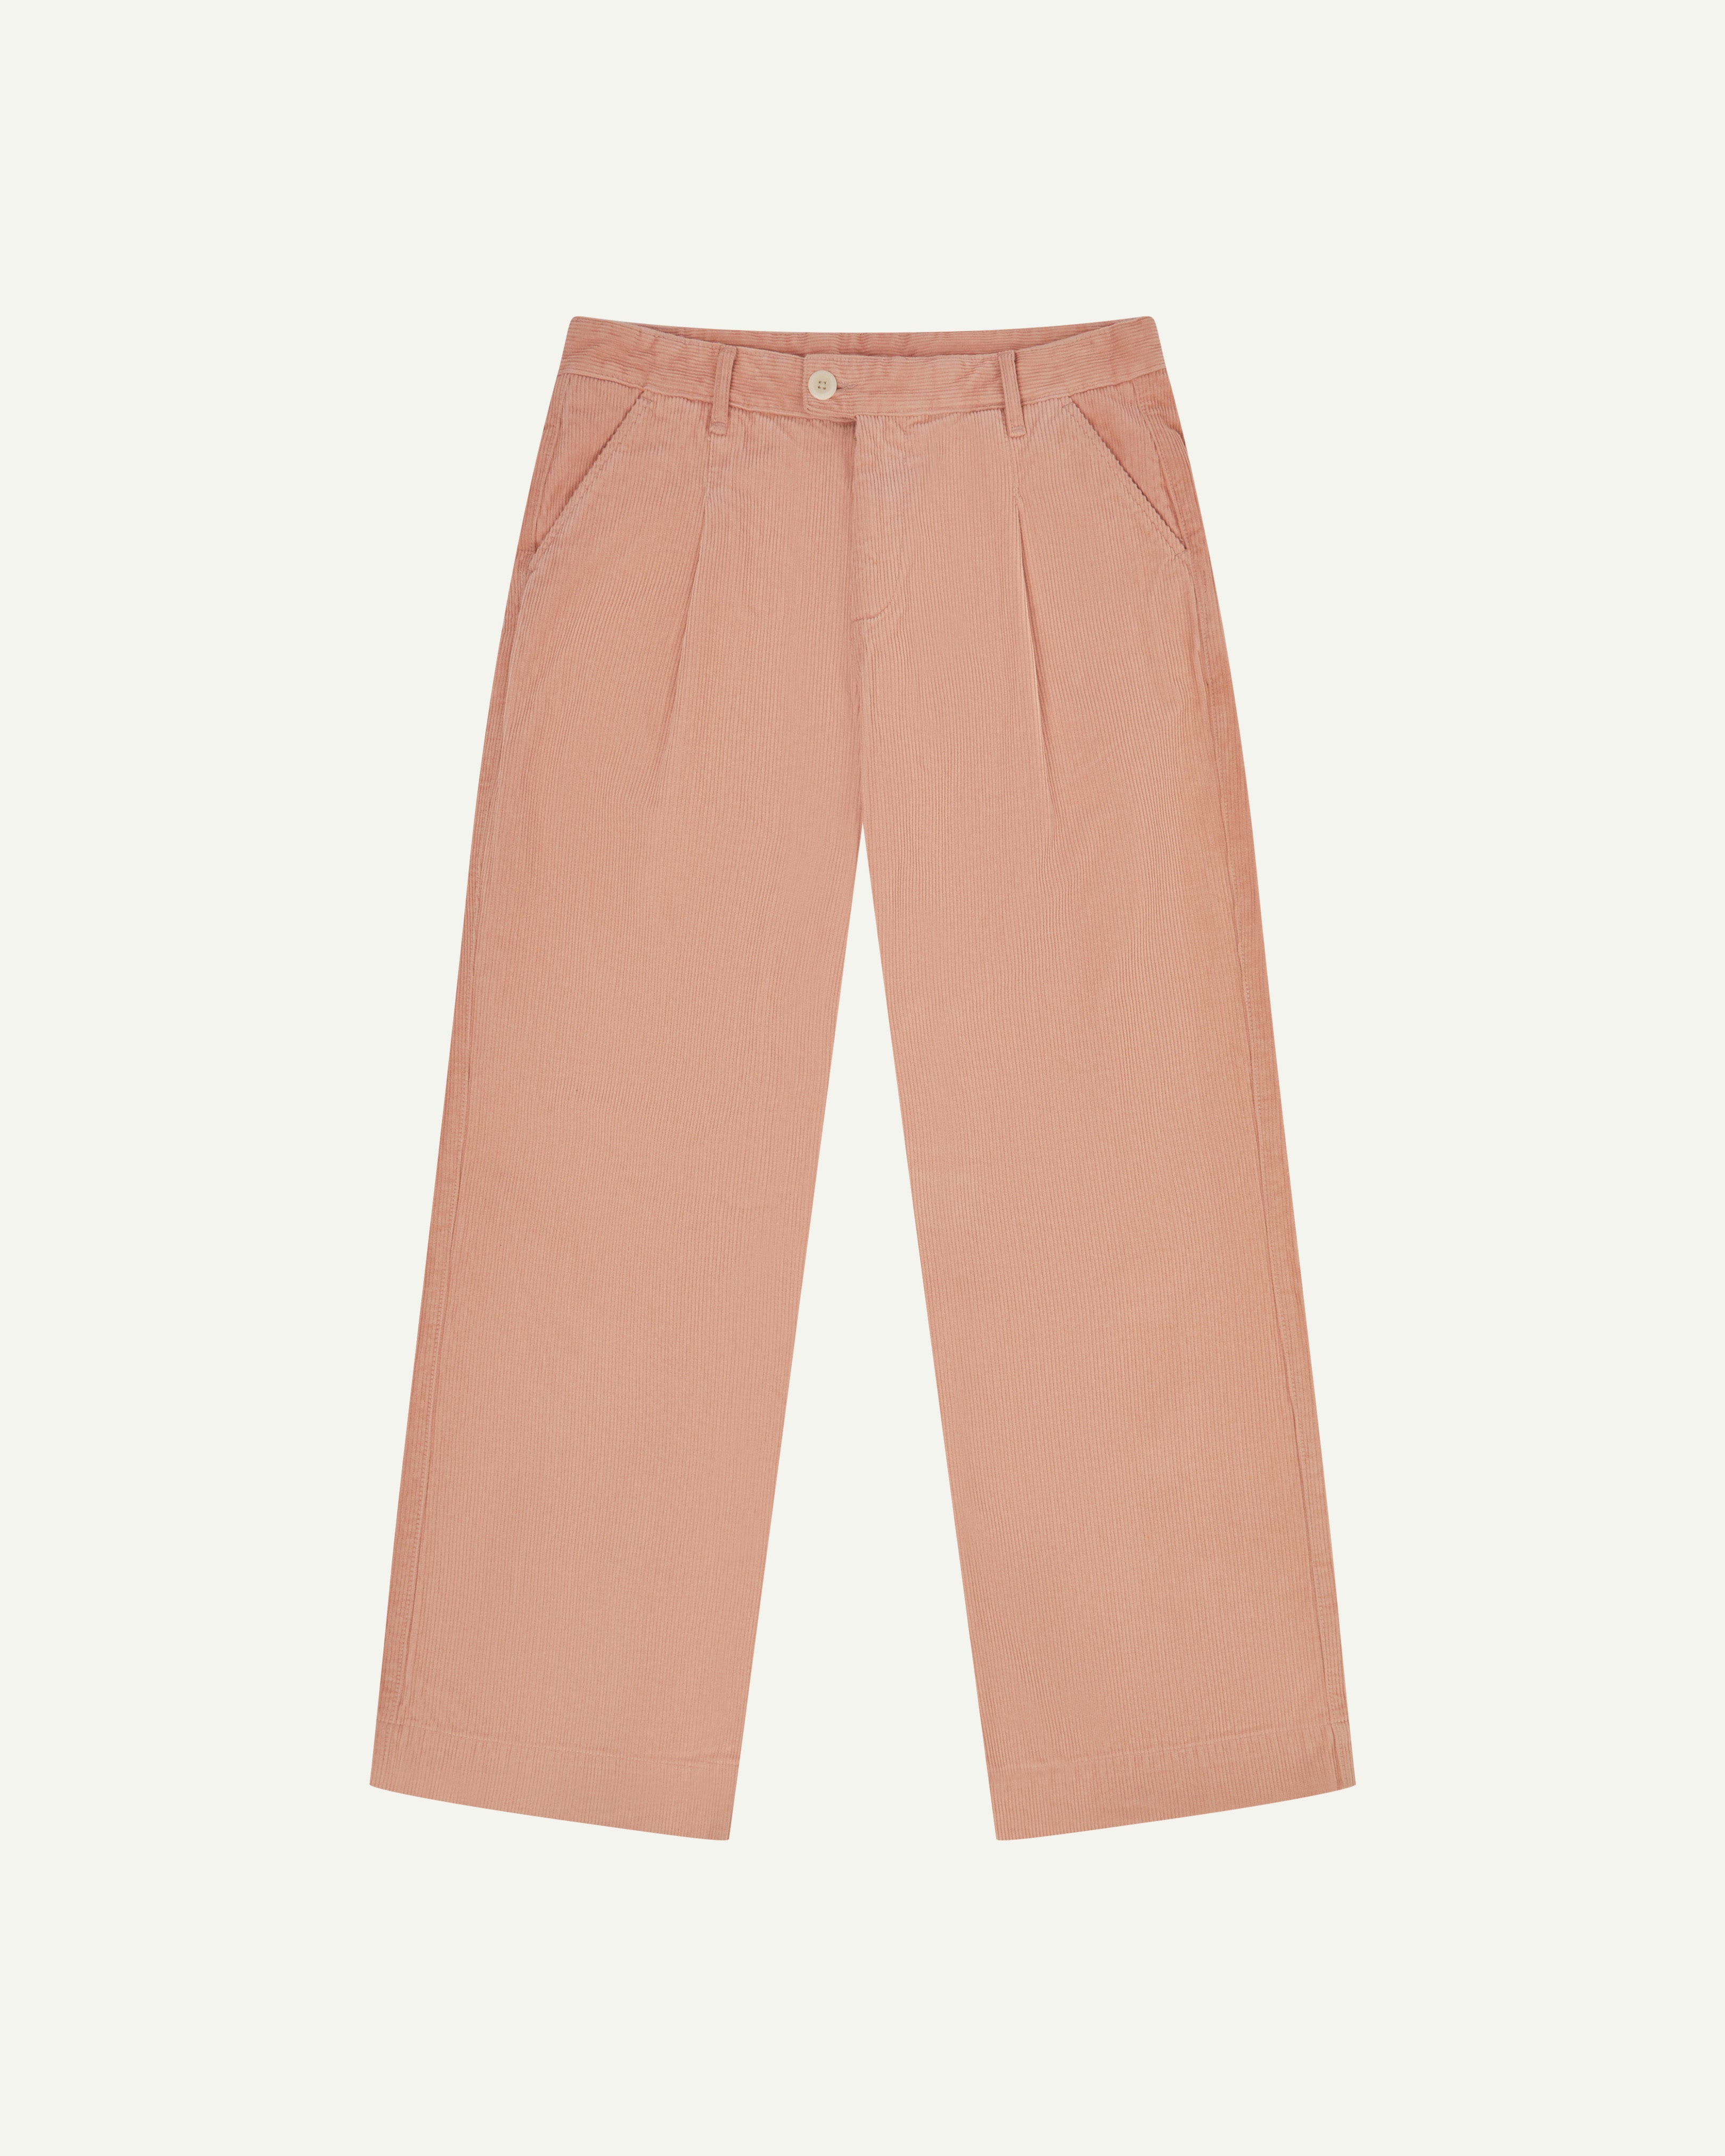 Front flat shot of #5018 Uskees men's organic corduroy boat trousers in dusty pink showing wide leg style